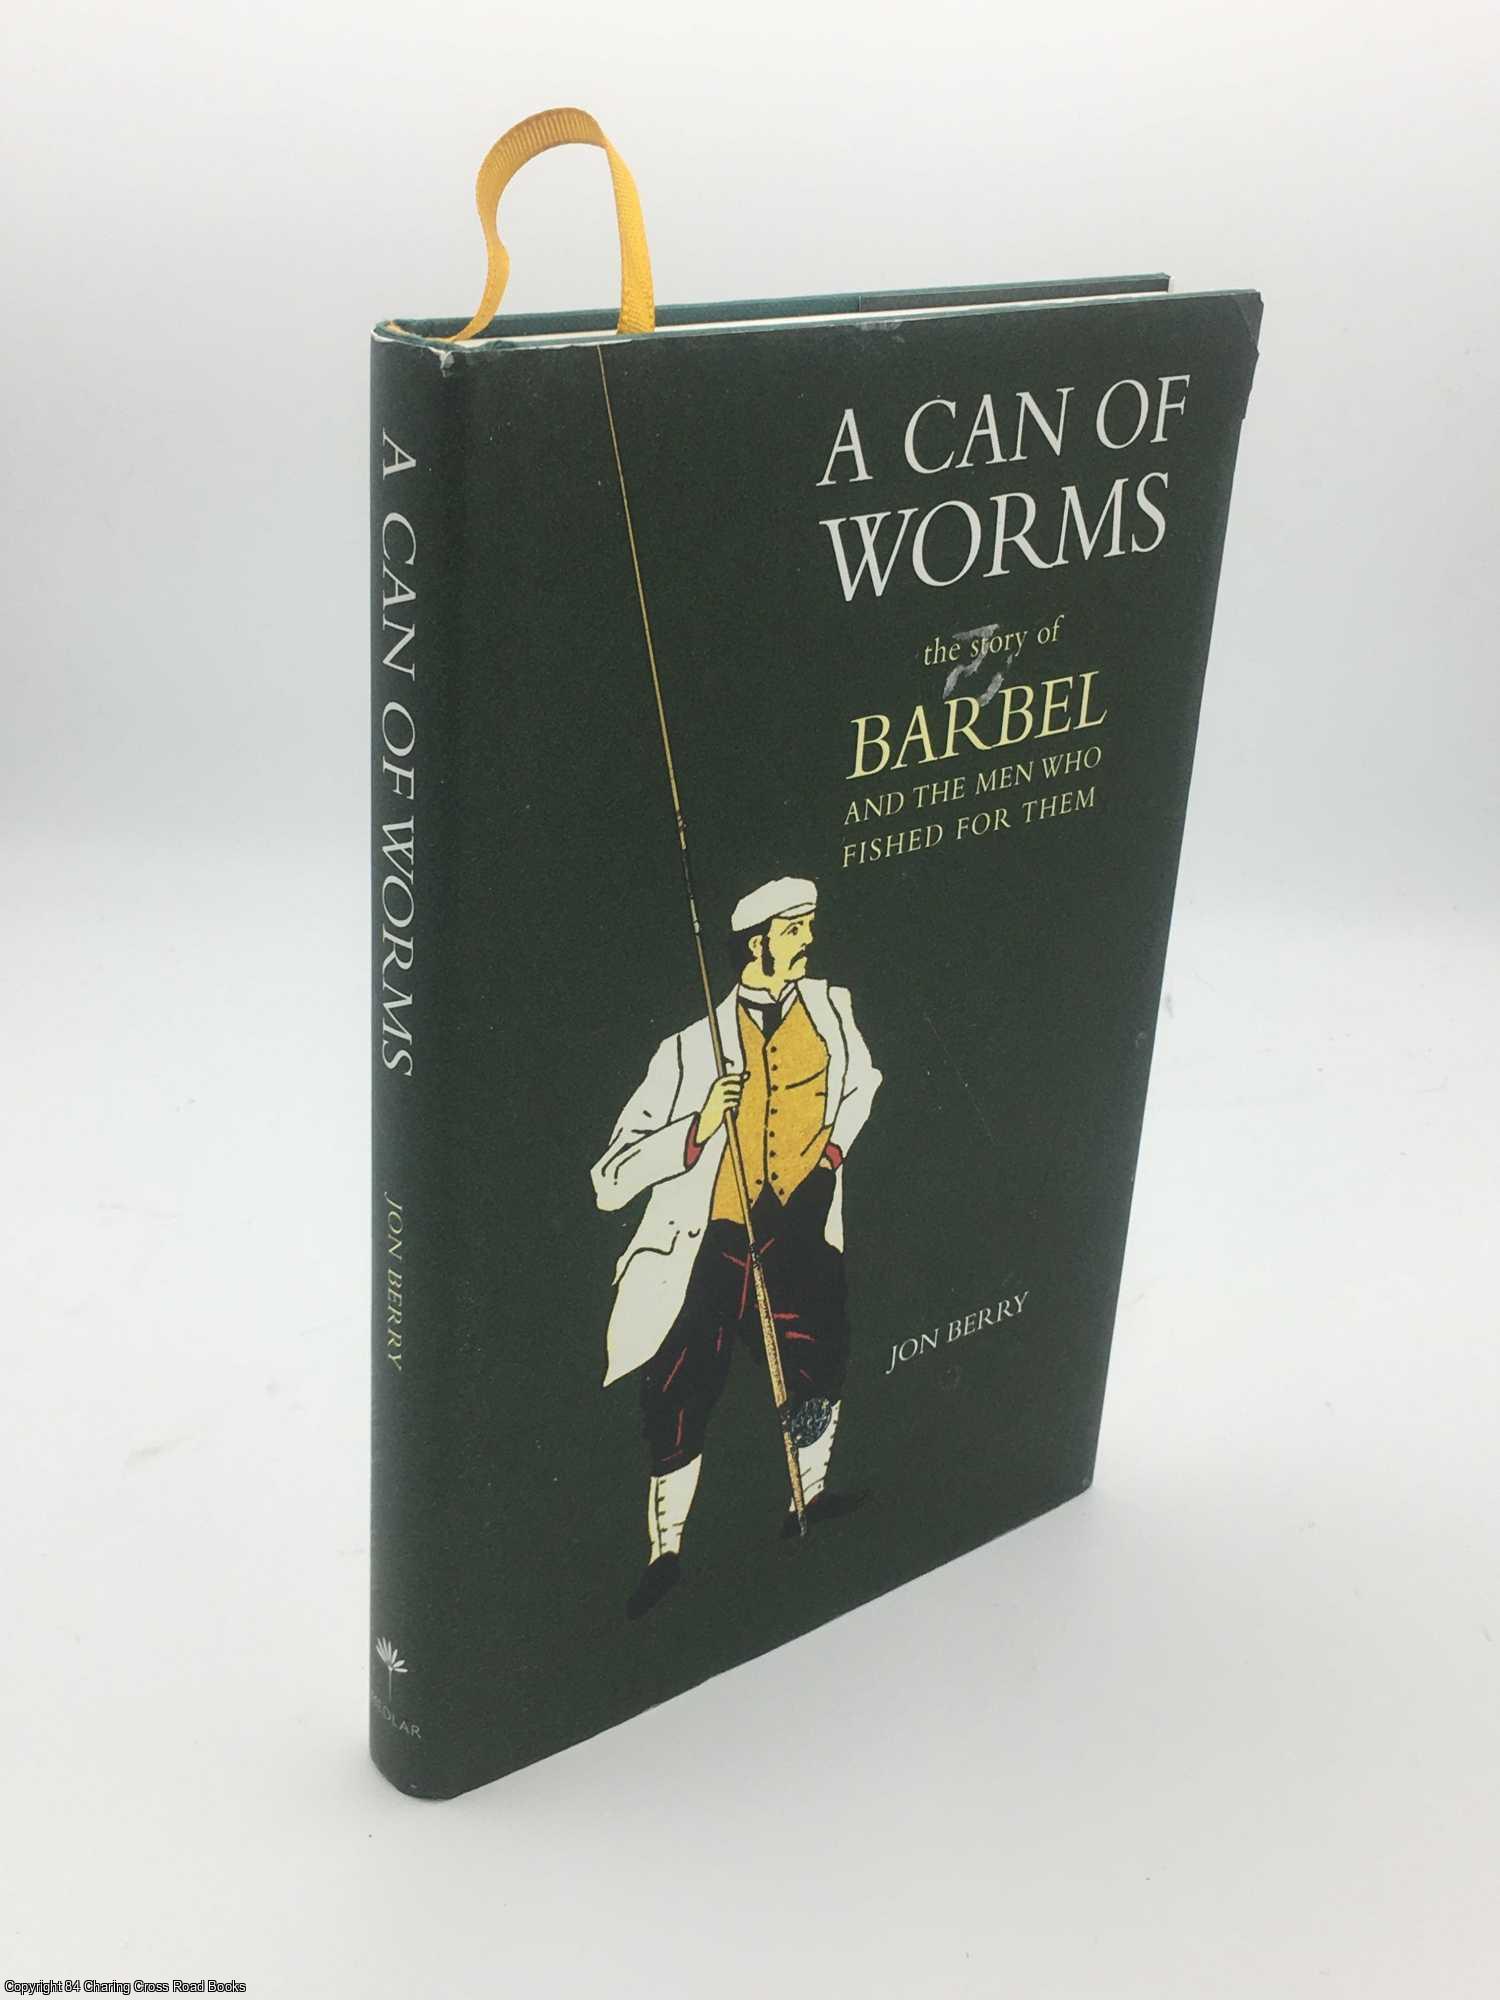 Berry, Jon - A Can of Worms: The Story of Barbel and the Men Who Fished for Them